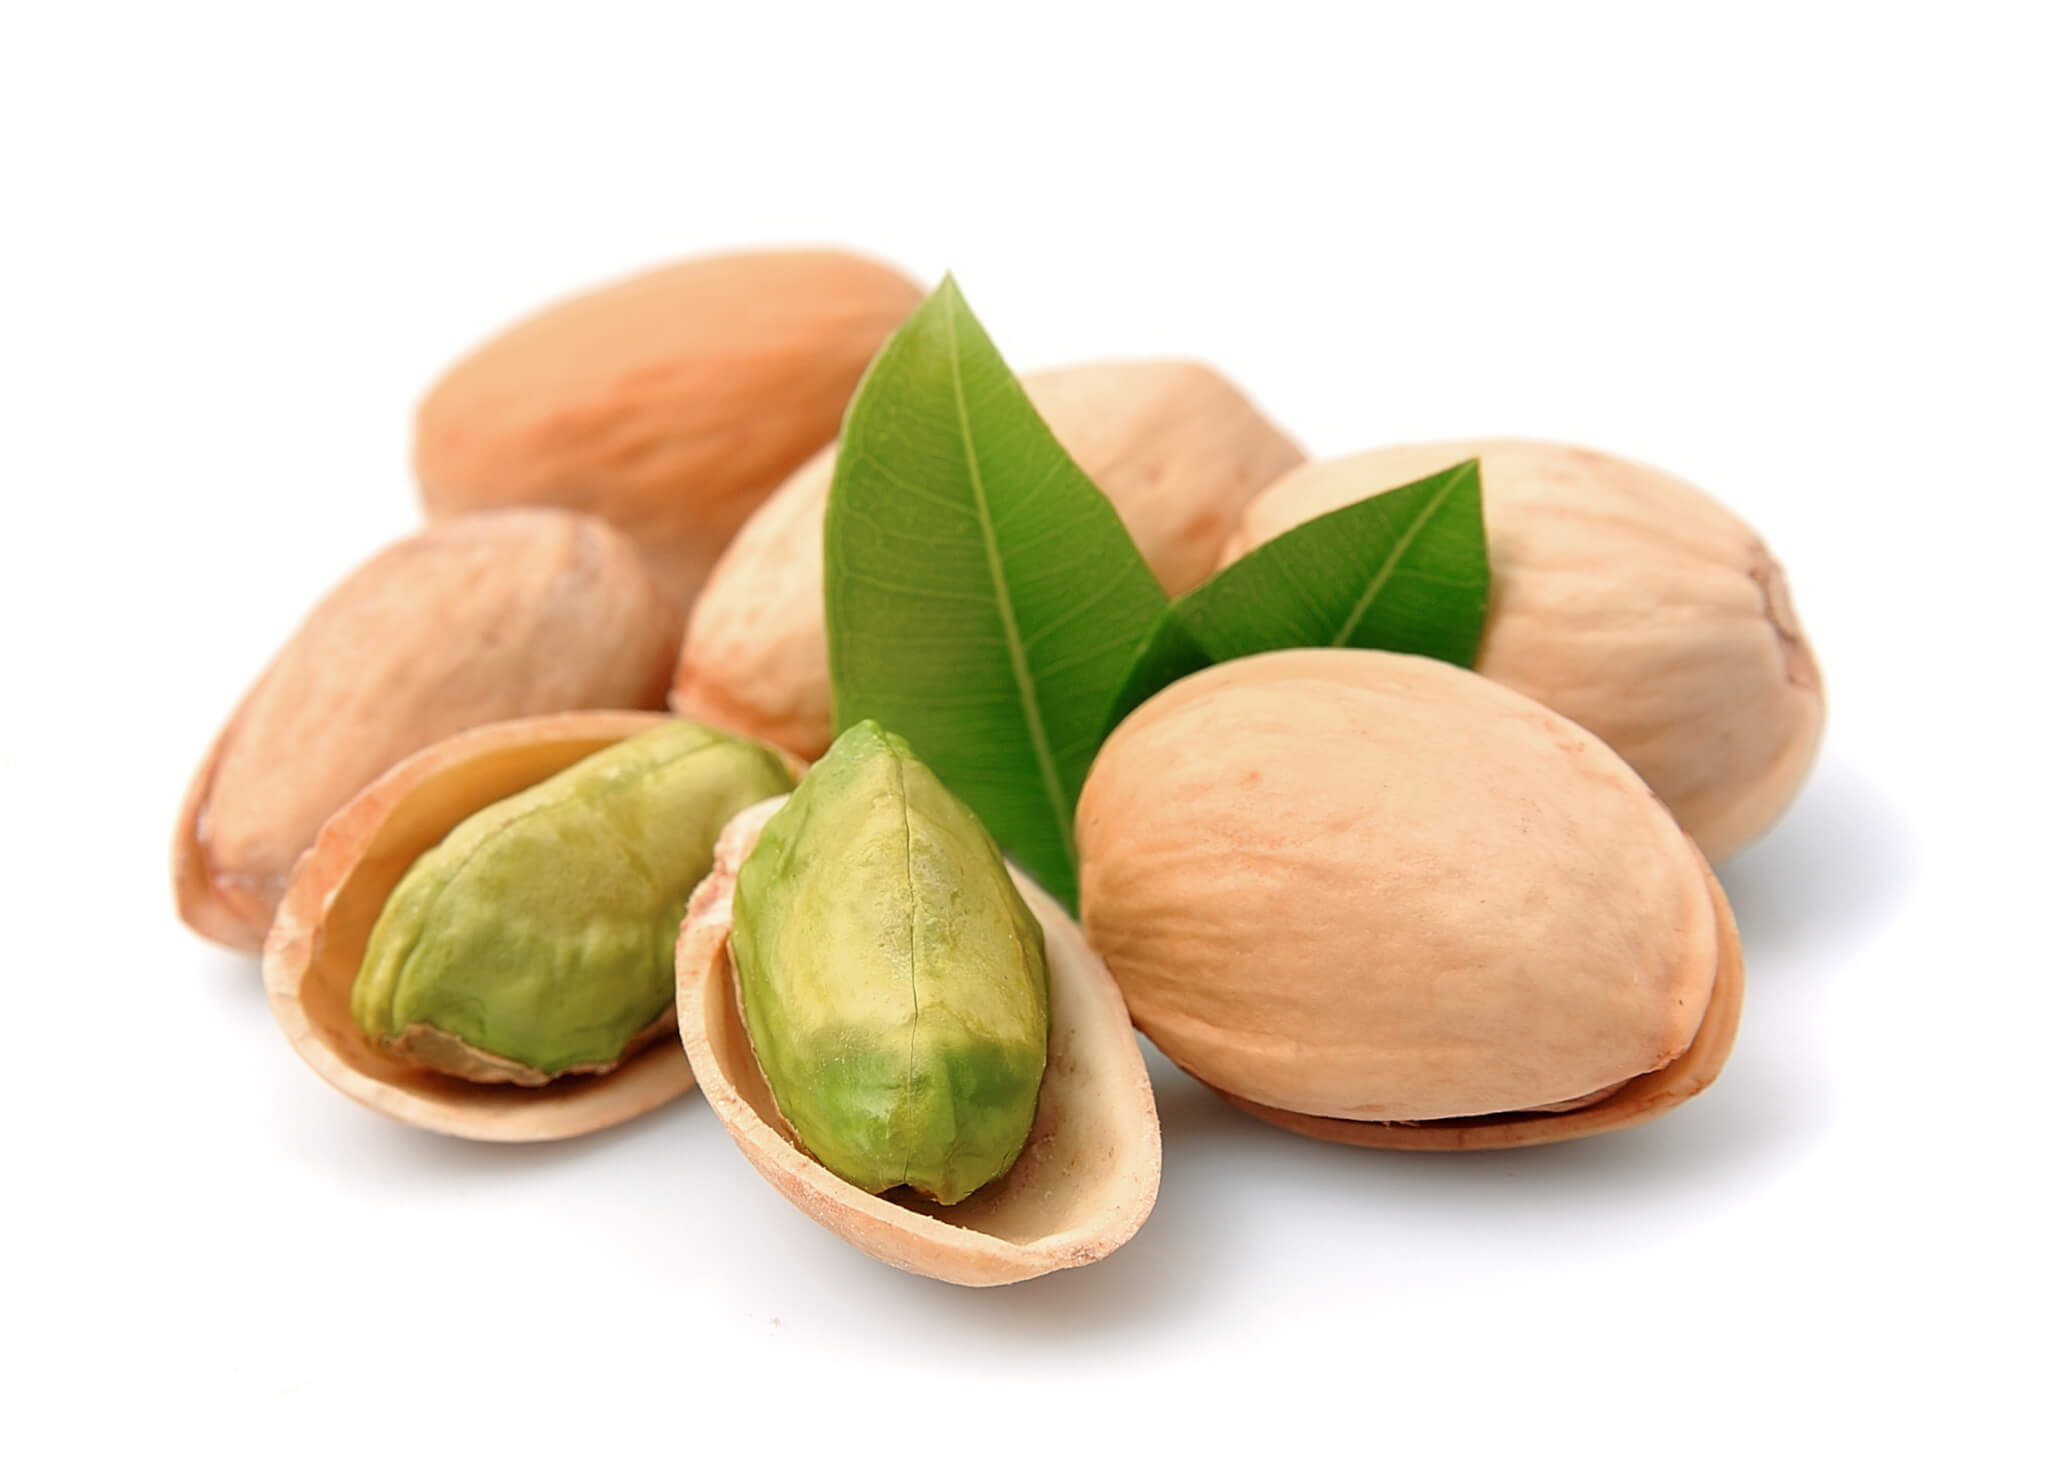 Why Pistachios Are Often Sold In Their Shells